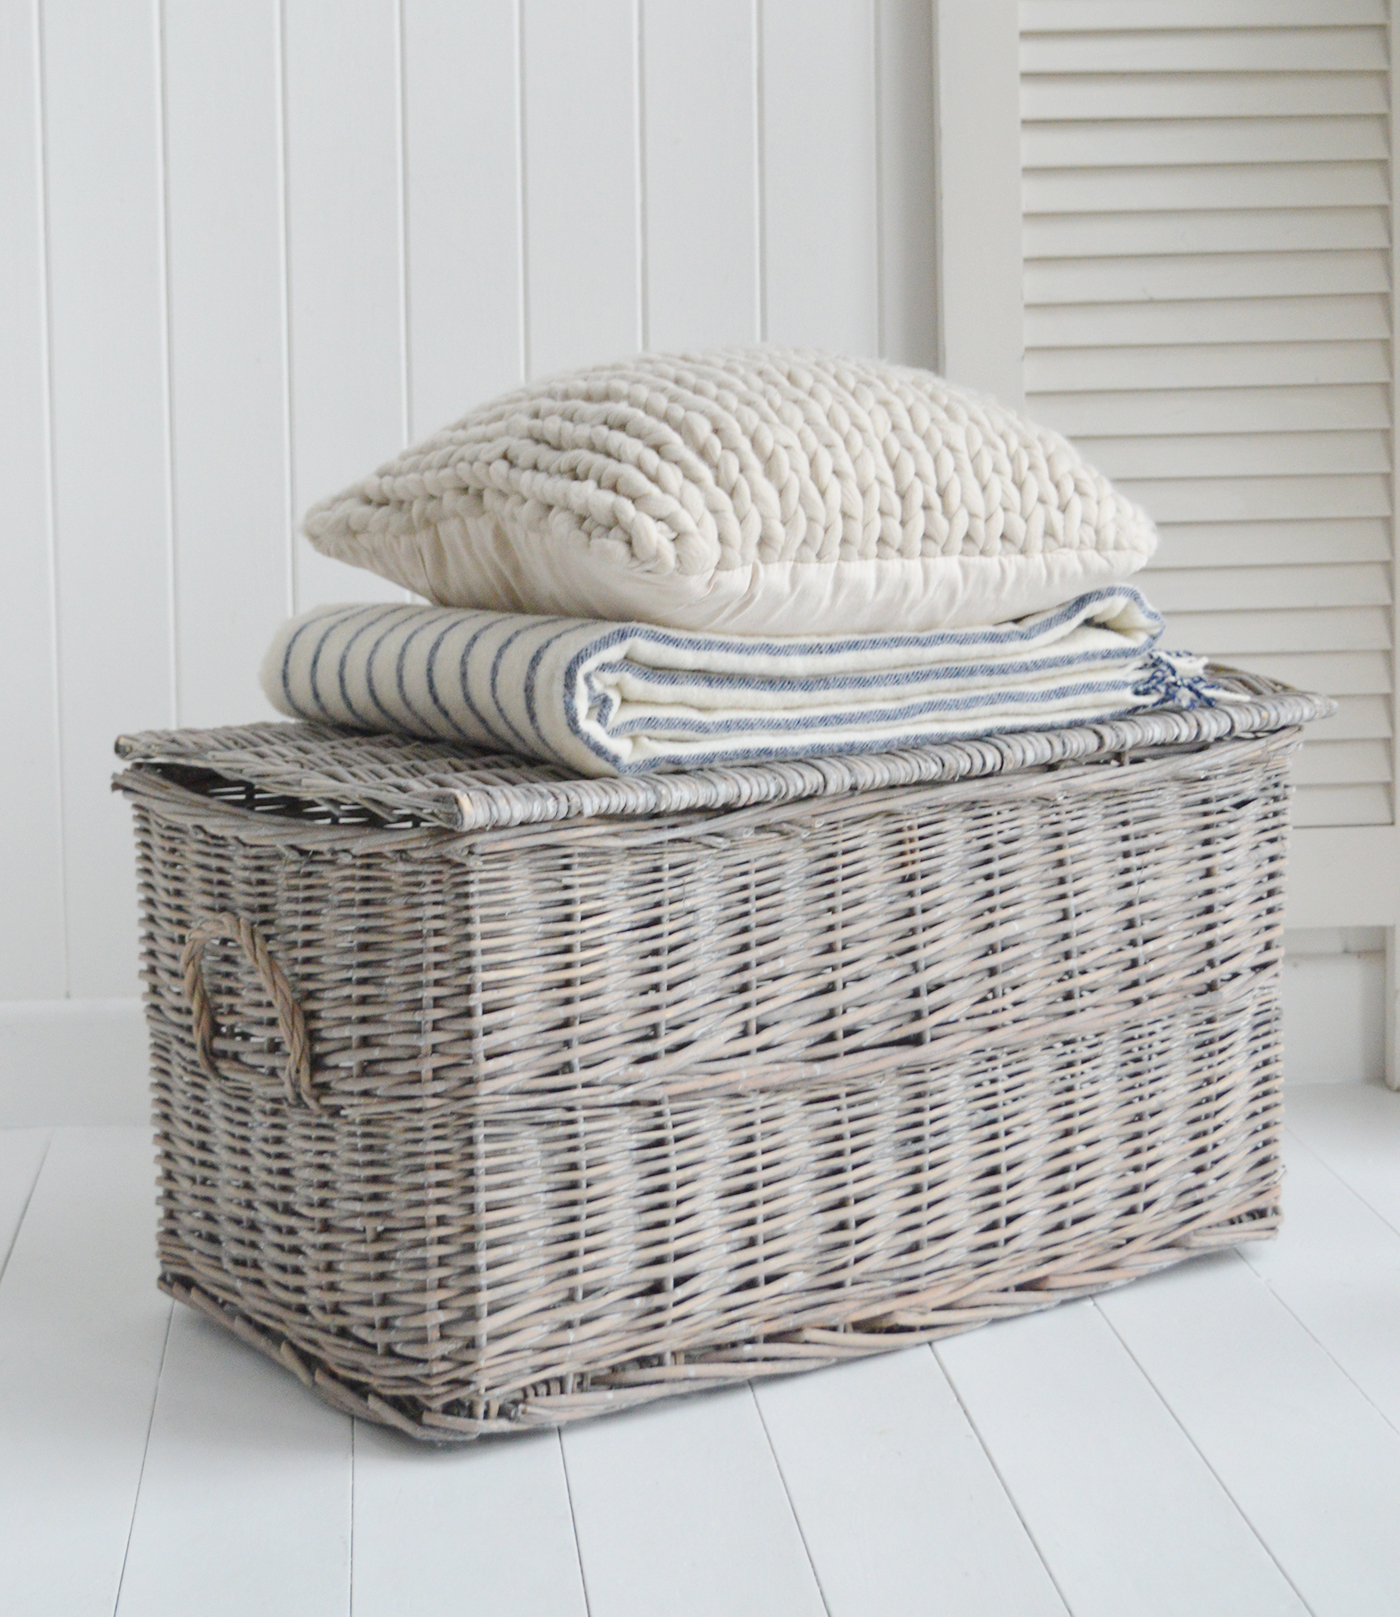 White Furniture and accessories for the home. Windsor set of two grey willow basketts with lids for New England, Hamptons, modern country farmhopuse and coastal homes and interiors 